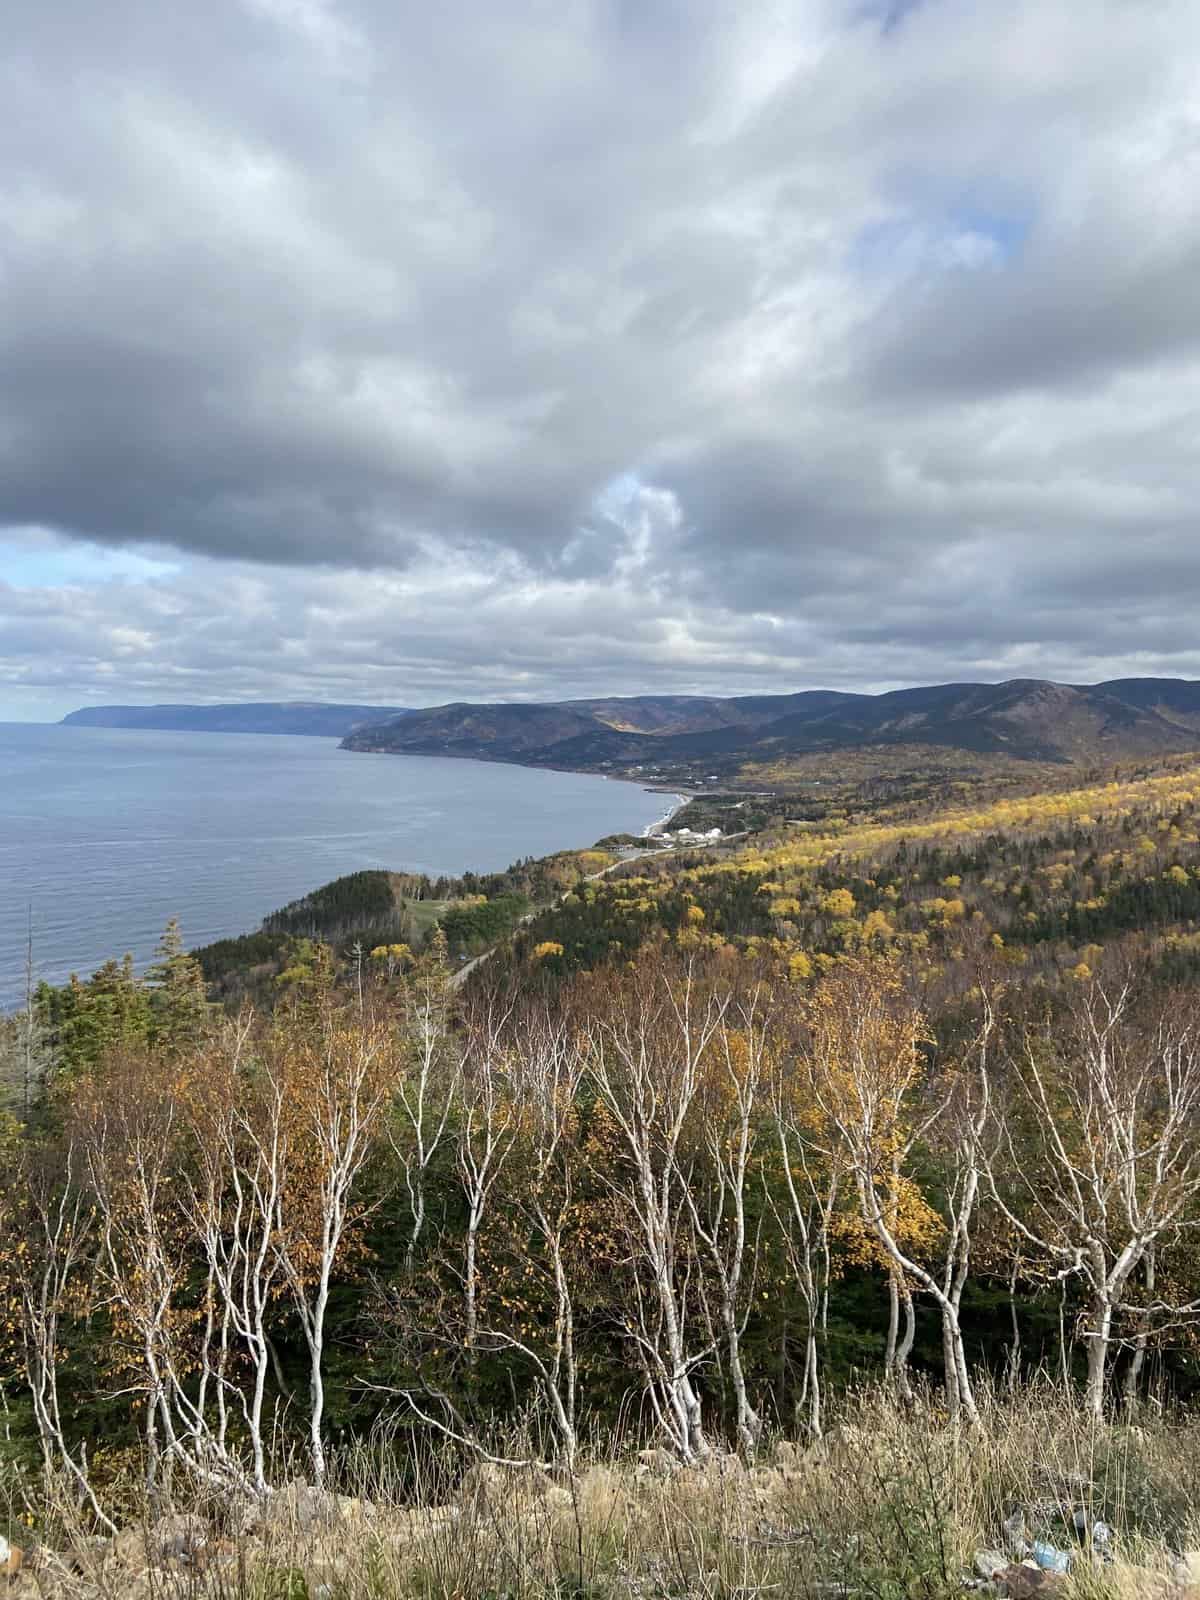 Views of the Cabot Trail on Cape Breton Island